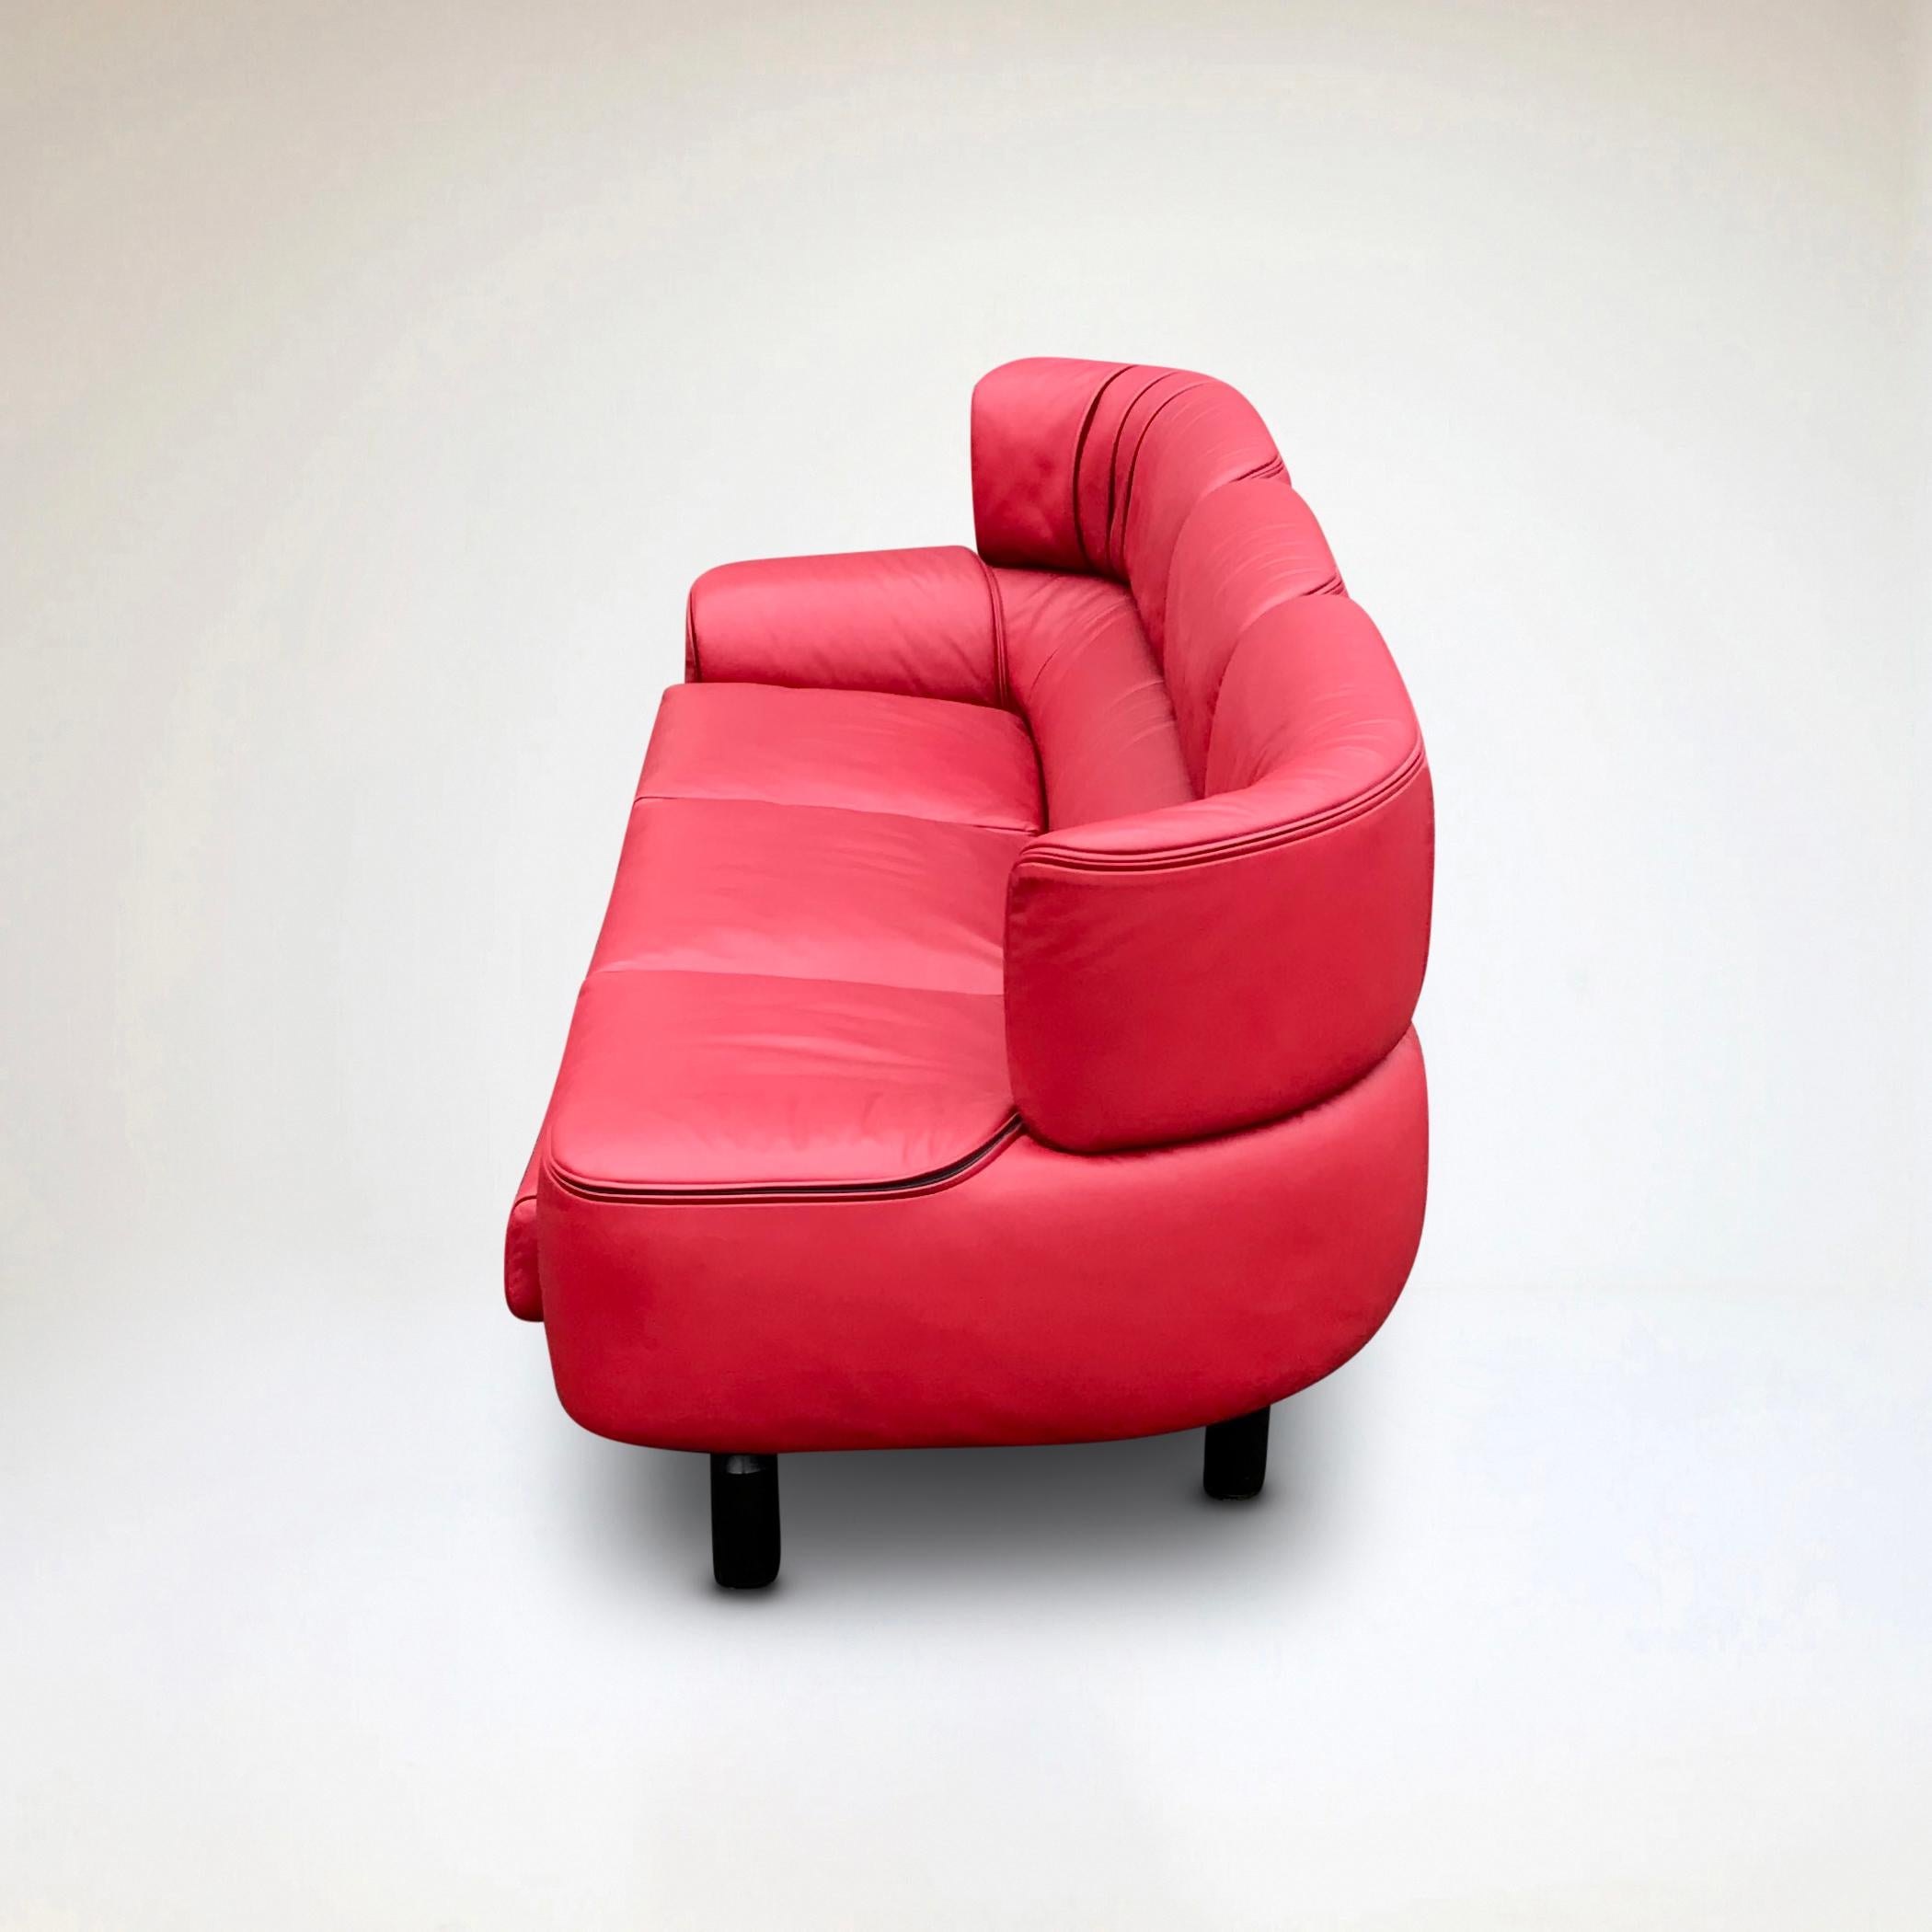 Leather Bull 3-seater red leather sofa by Gianfranco Frattini for Cassina 1987 For Sale